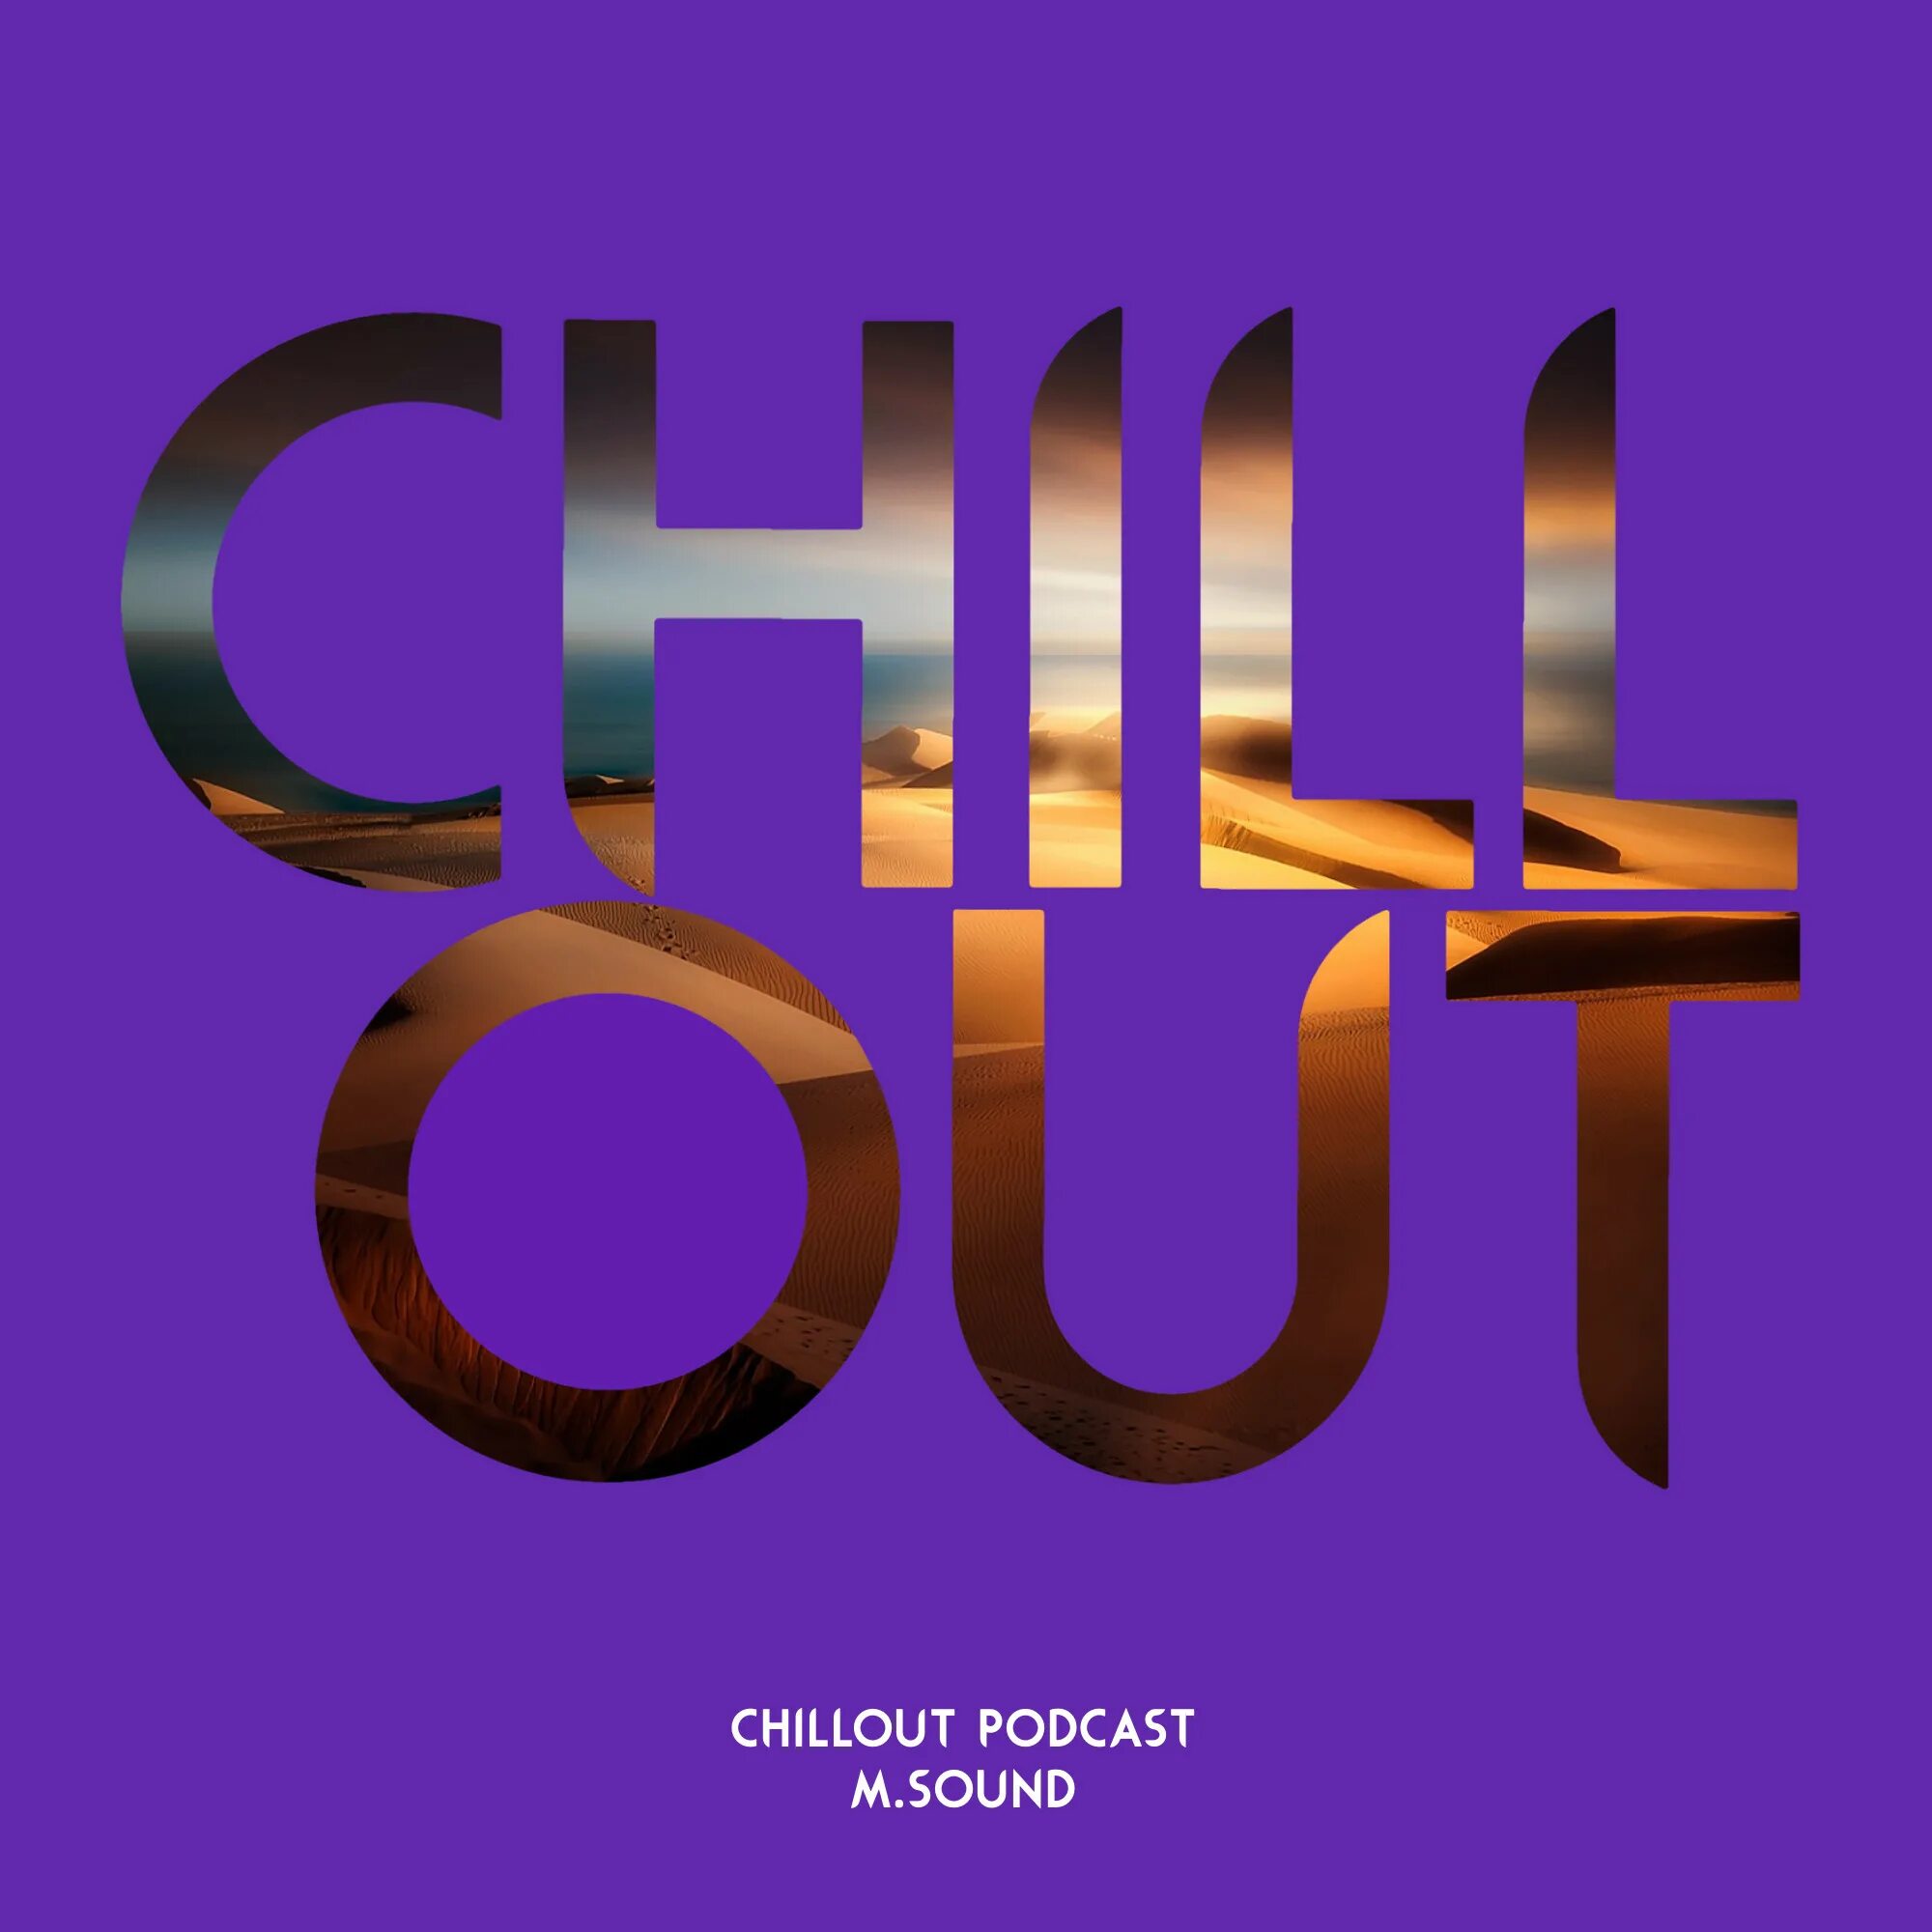 Stand chillout. Chillout подкасты. Chillout картинки. Chillout обложка альбома. Баннер Chillout.